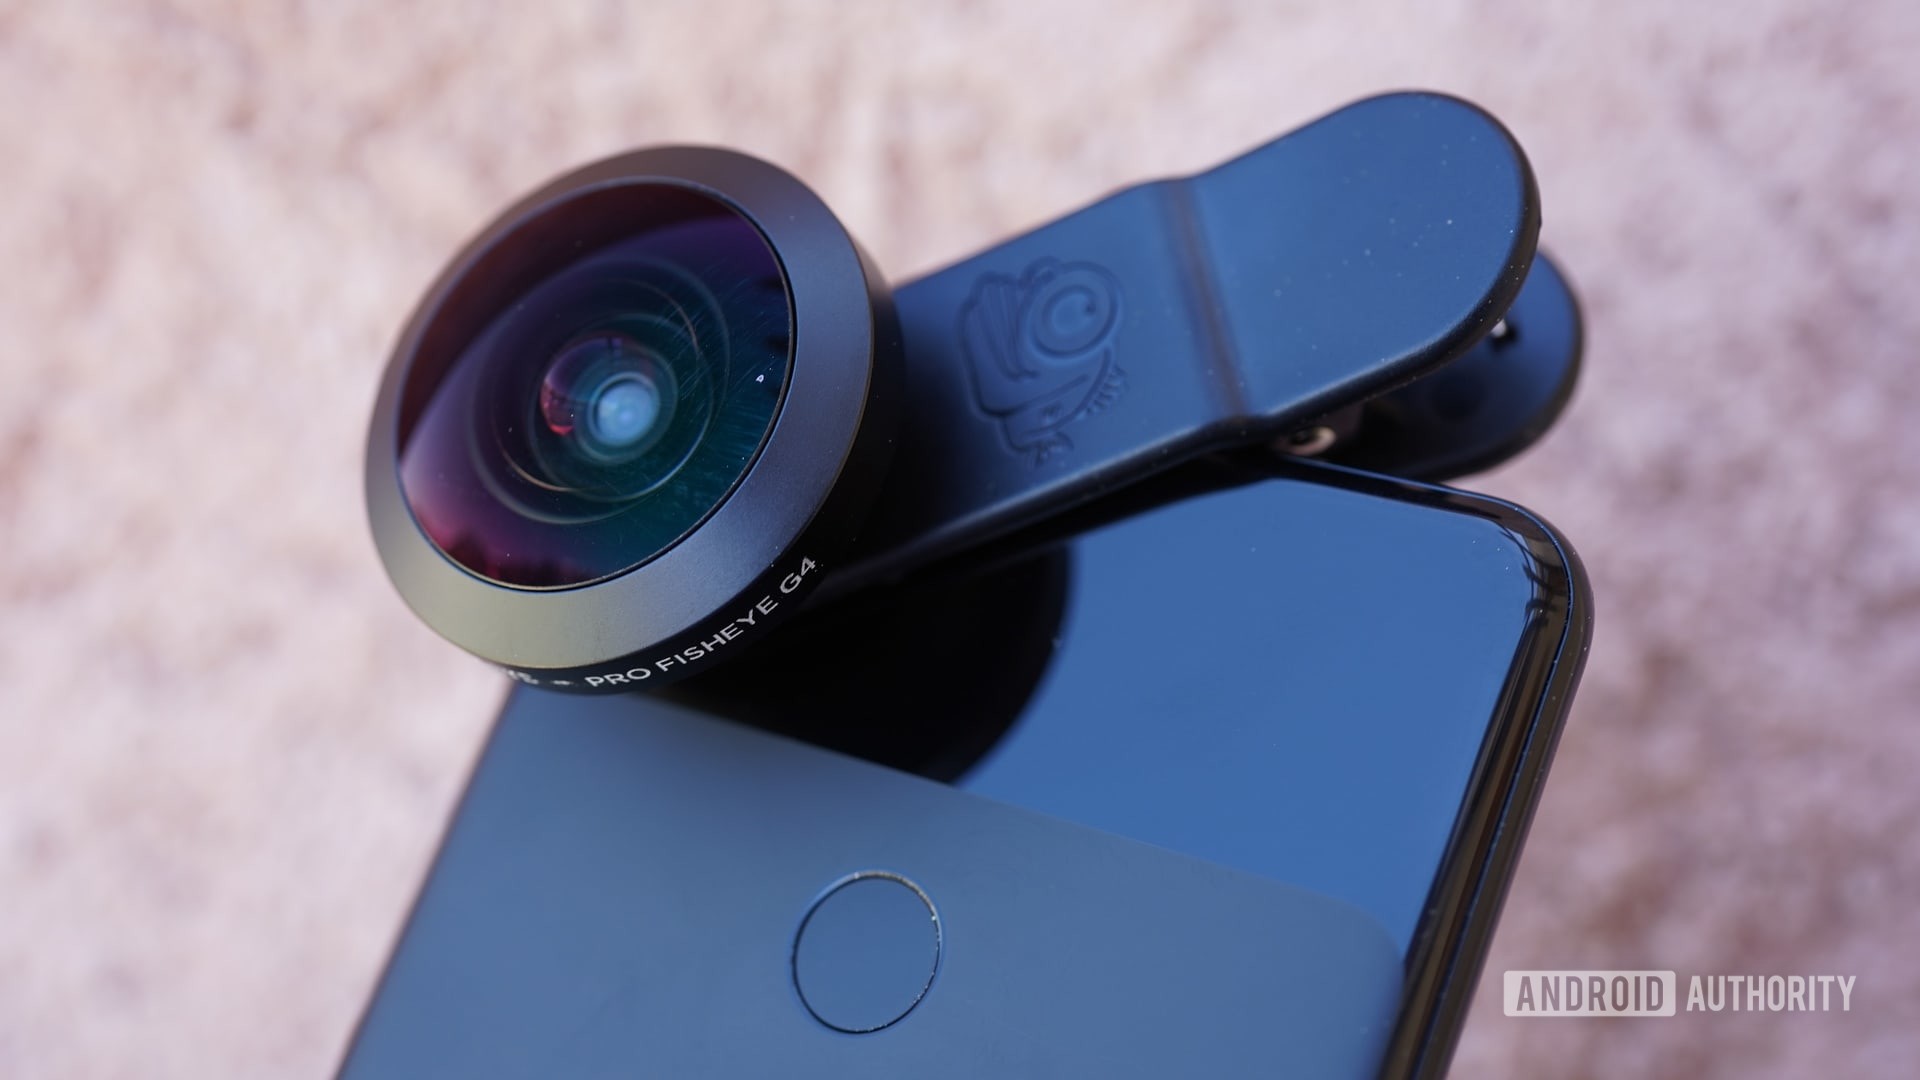 Samsung Galaxy Phone Lenses by Black Eye || Pro Fisheye G4 Phone Camera Lens Compatible with iPhone iPad and All Camera Phone Models 